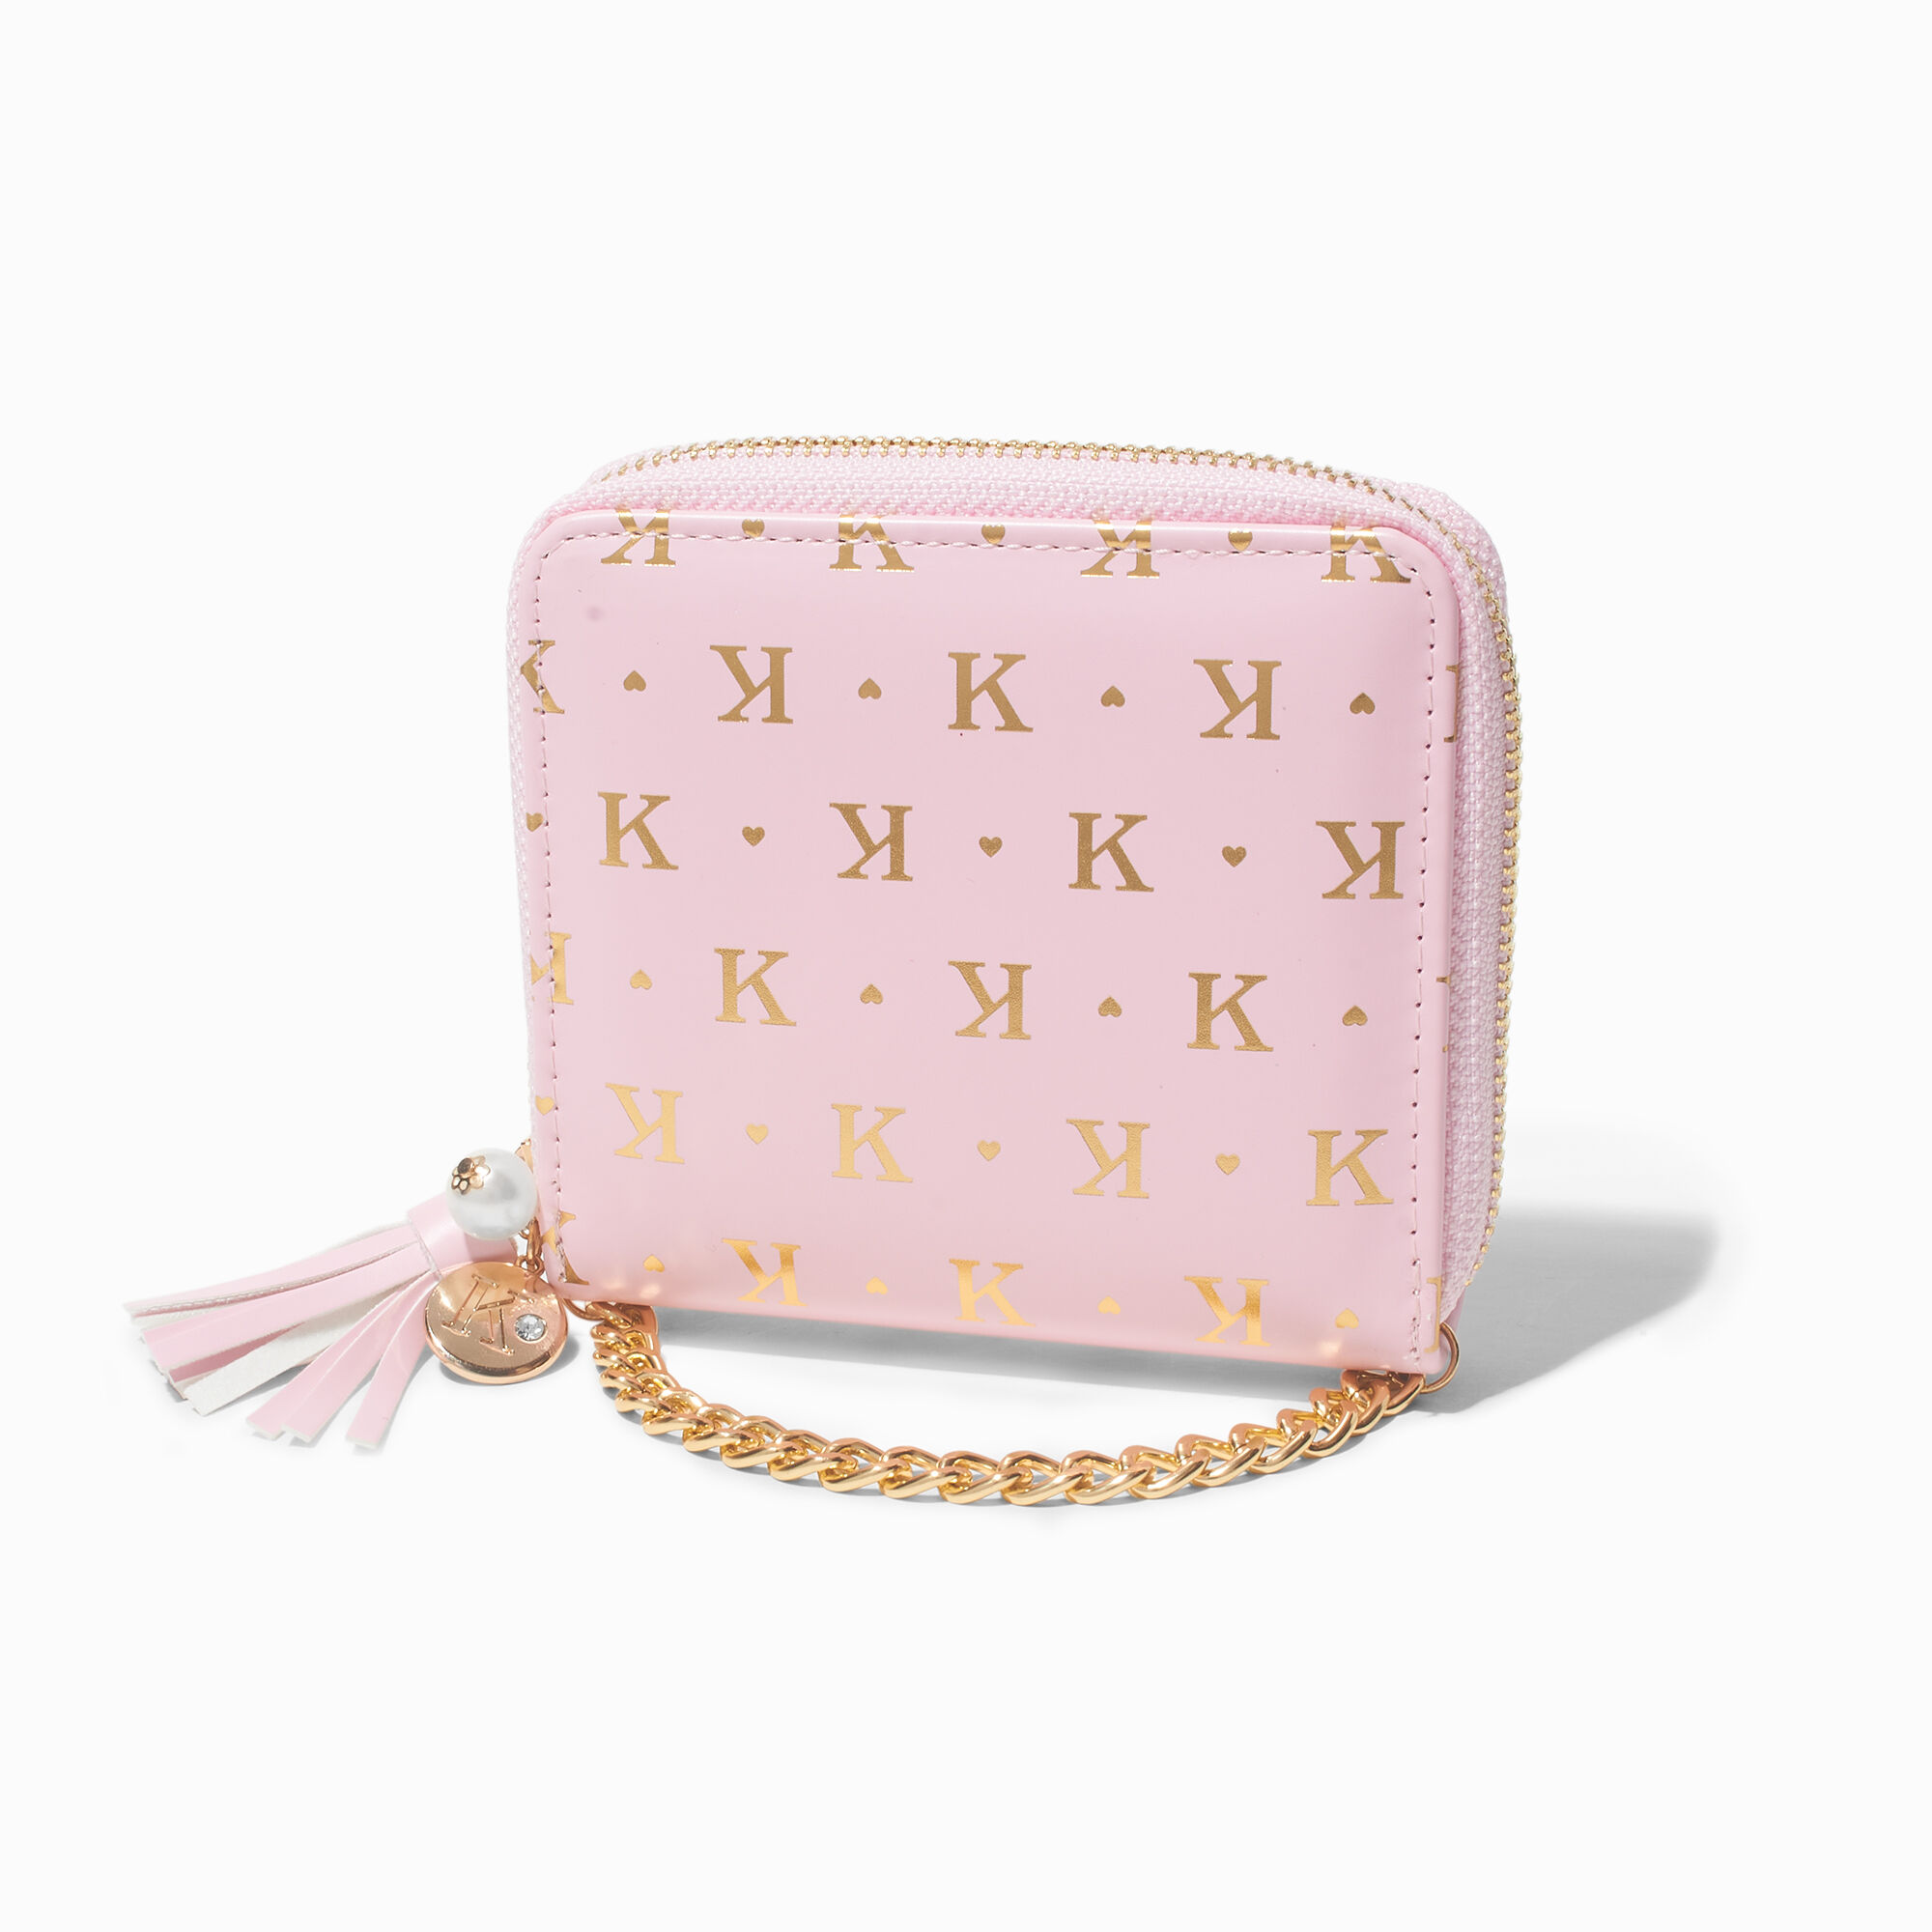 View Claires en Initial ChainStrap Wallet K Gold information